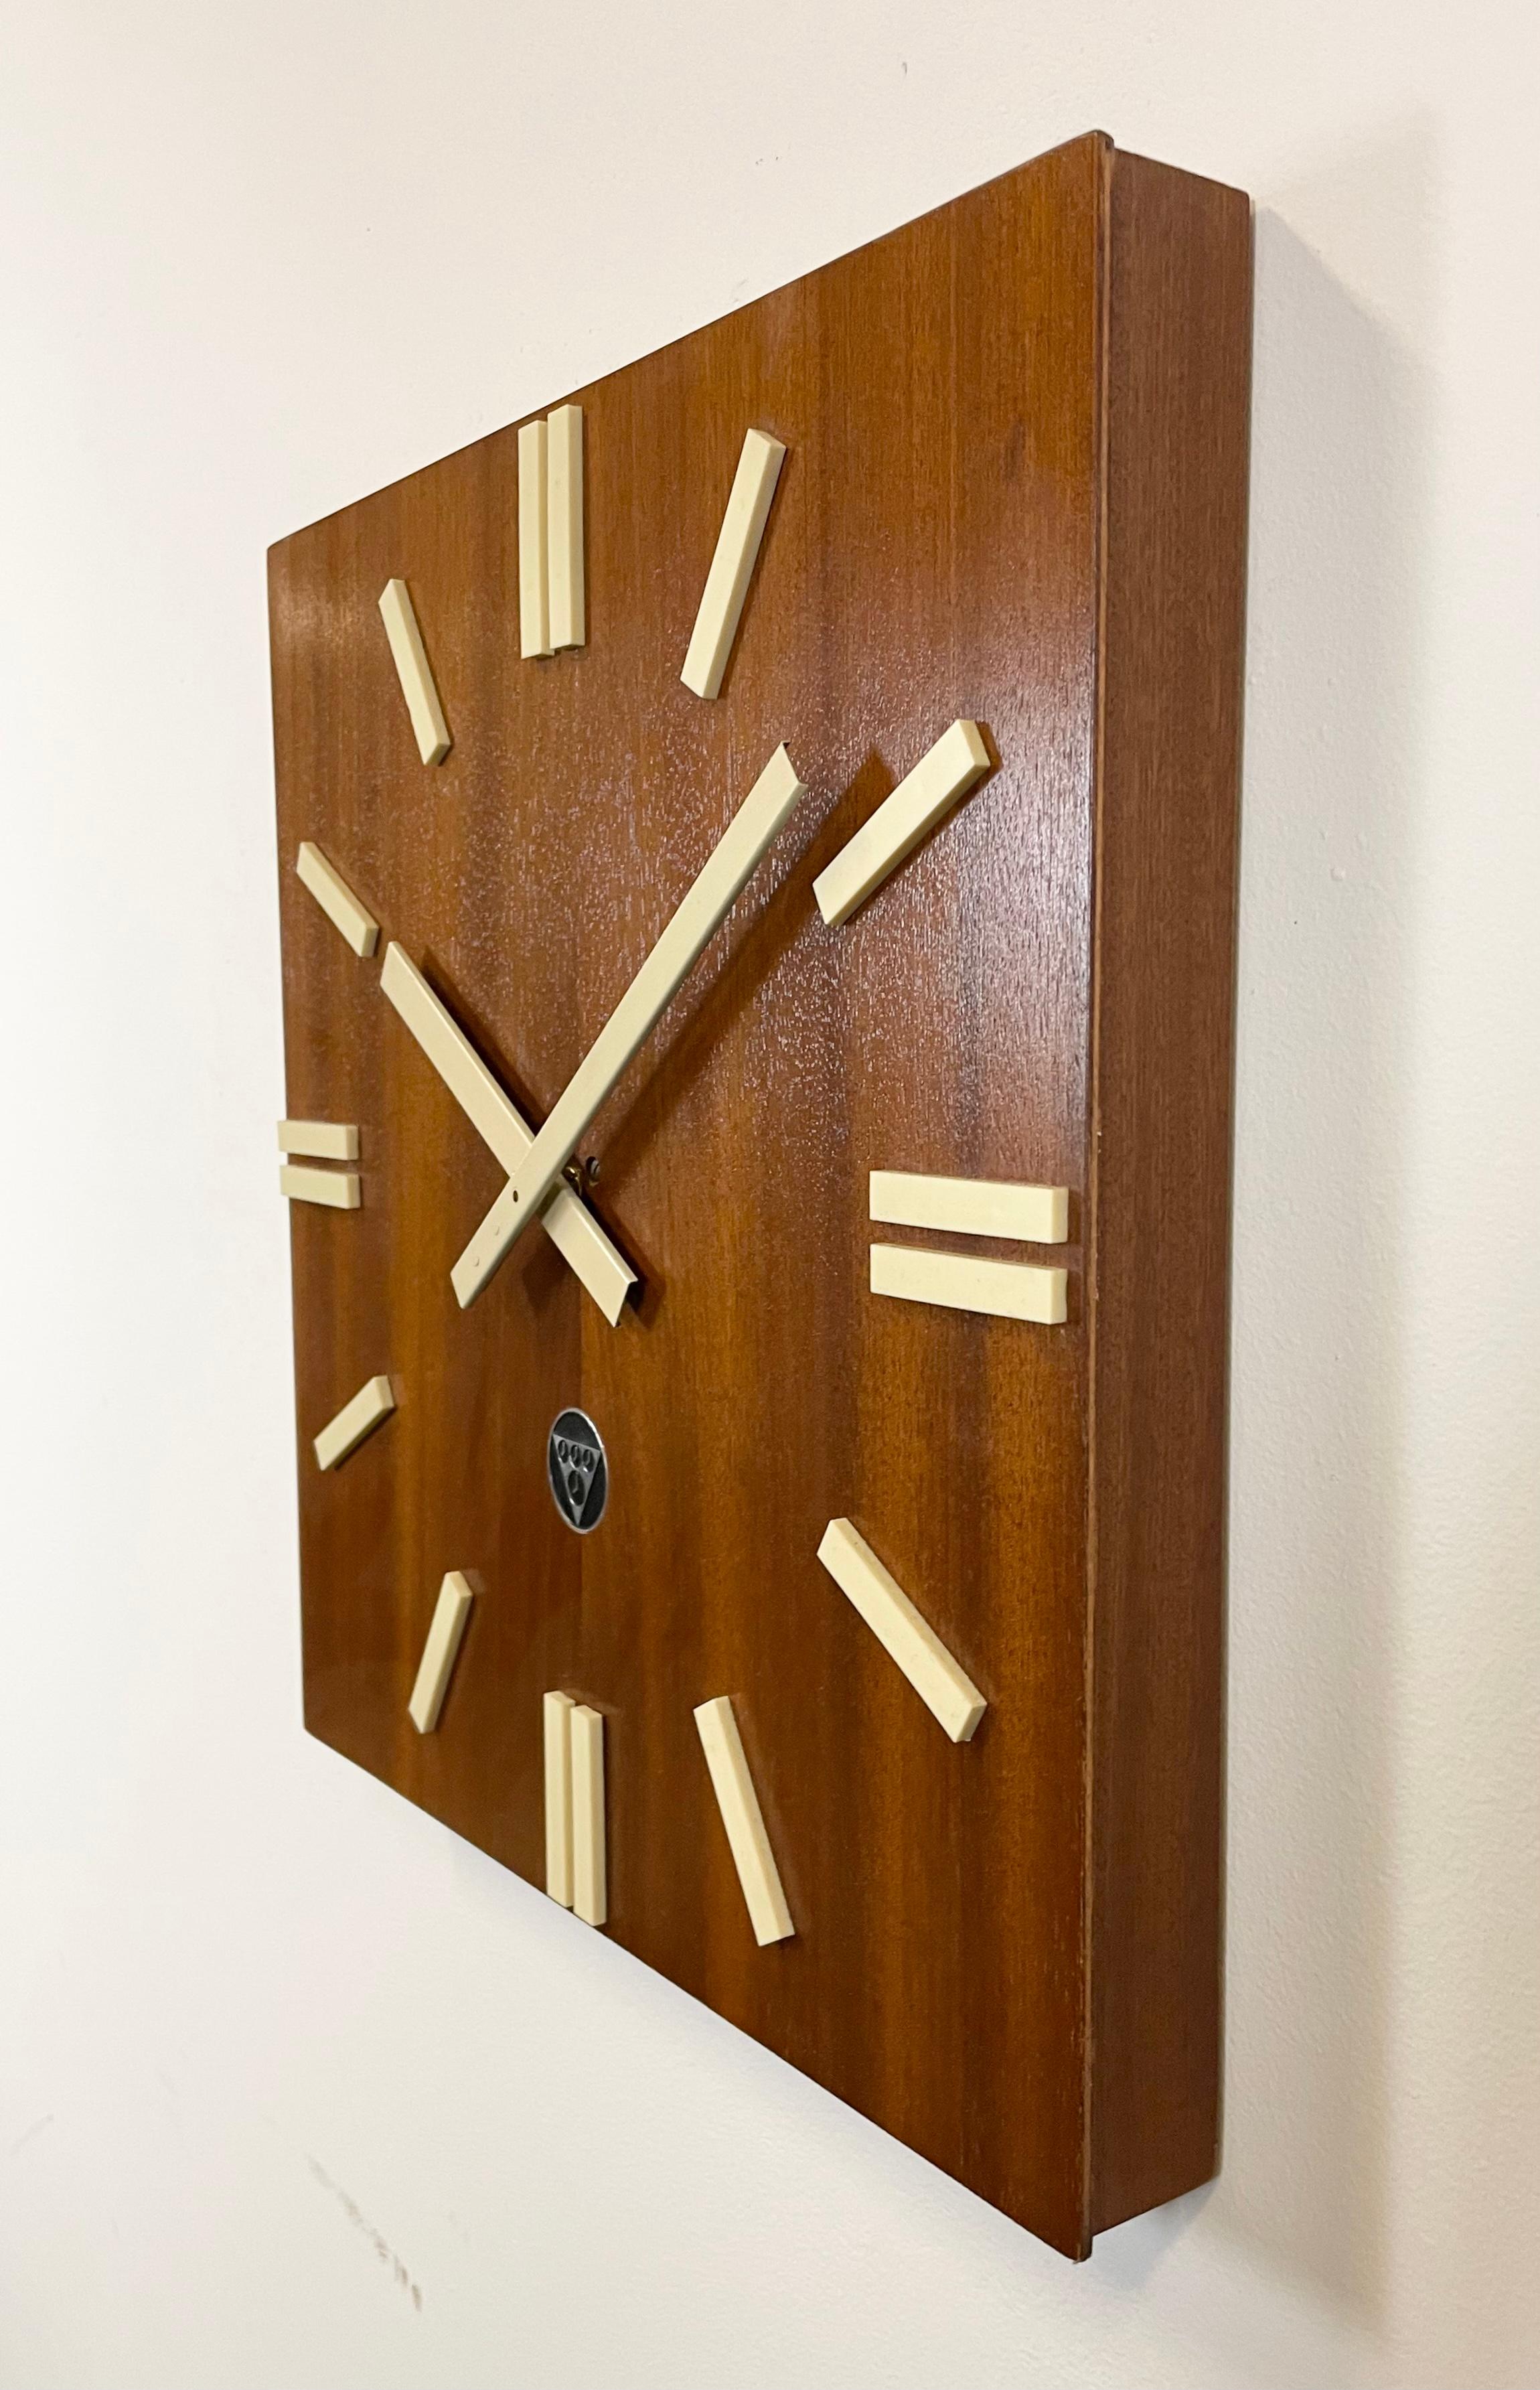 Czech Vintage Brown Wooden Wall Clock from Pragotron, 1980s For Sale